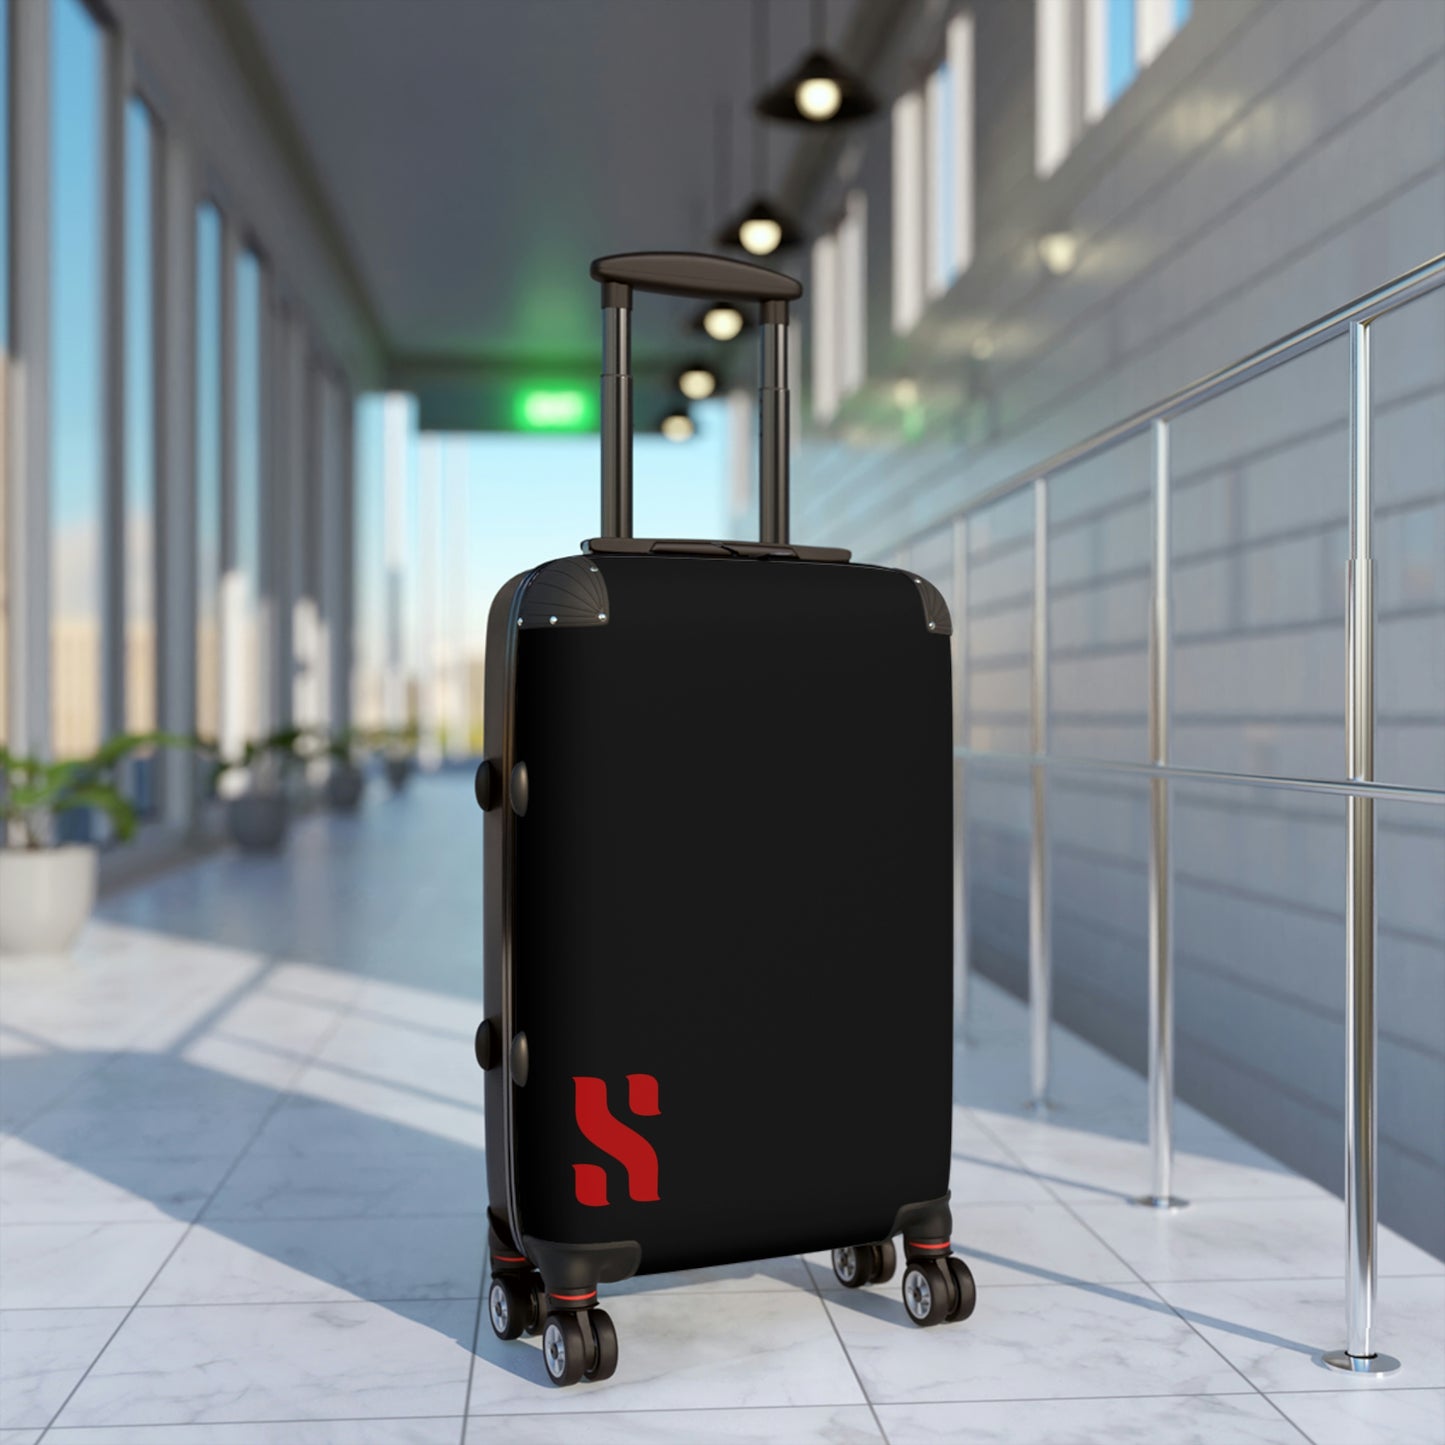 The Nomad Overhead Suitcase